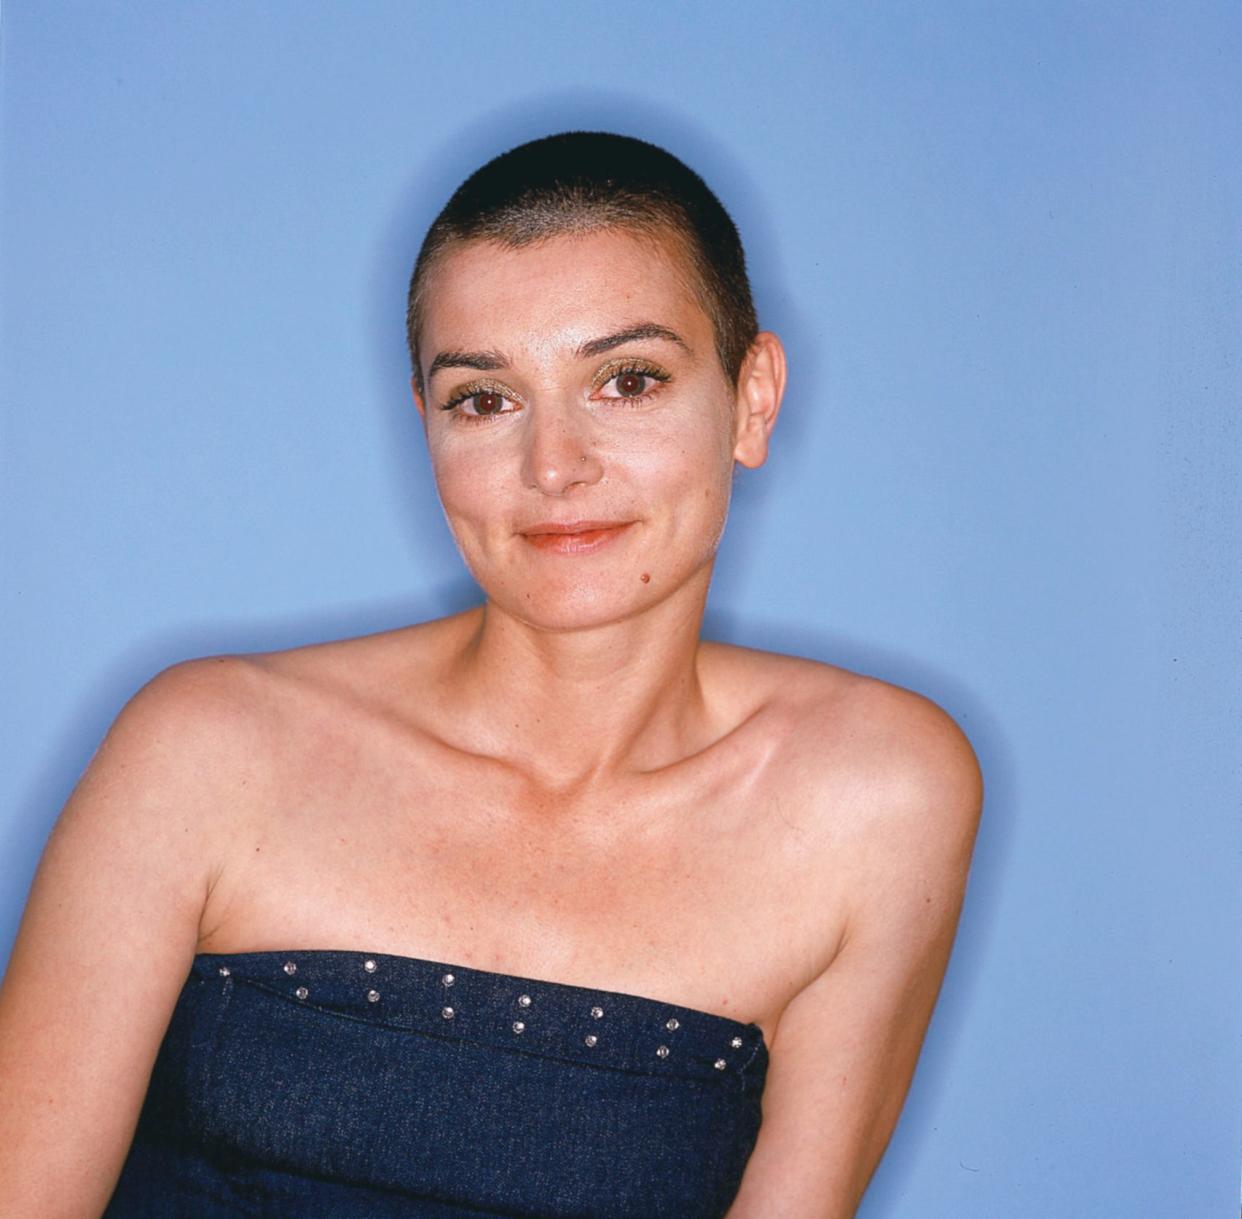 Sinead O'Connor poses for a portrait on June 2, 2000 in New York.